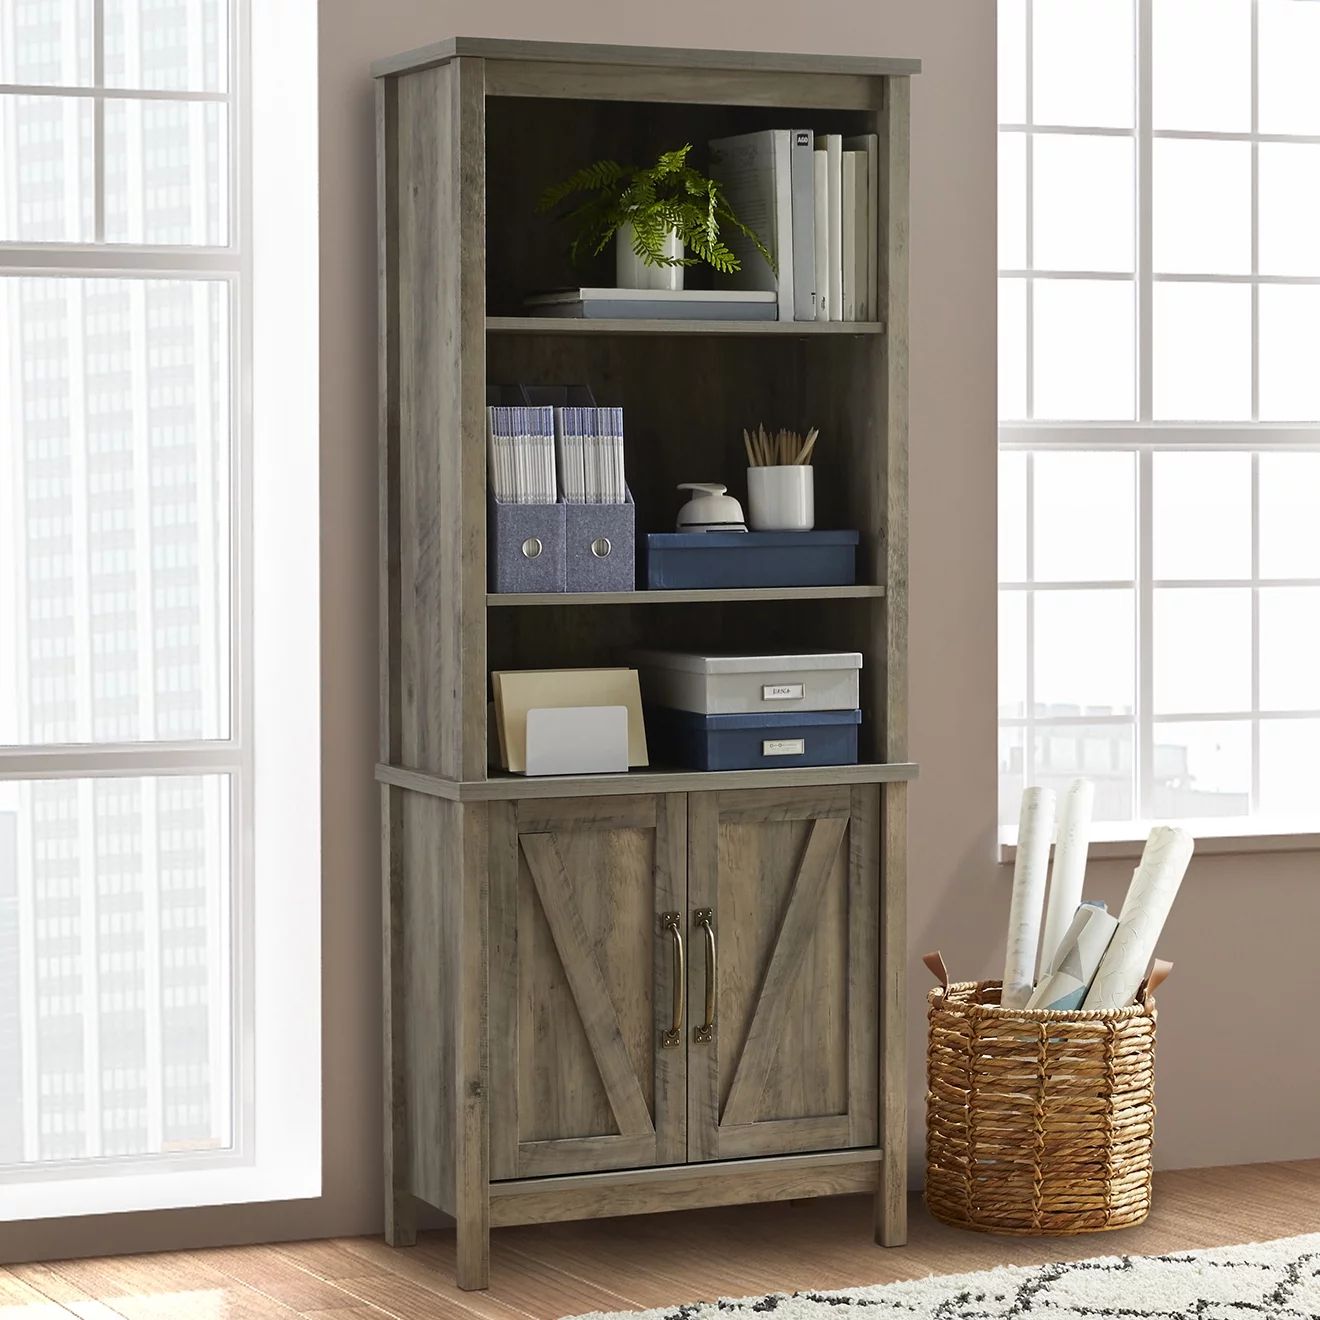 Better Homes & Gardens Modern Farmhouse 5 Shelf Library Bookcase with Doors, Rustic Gray Finish | Walmart (US)